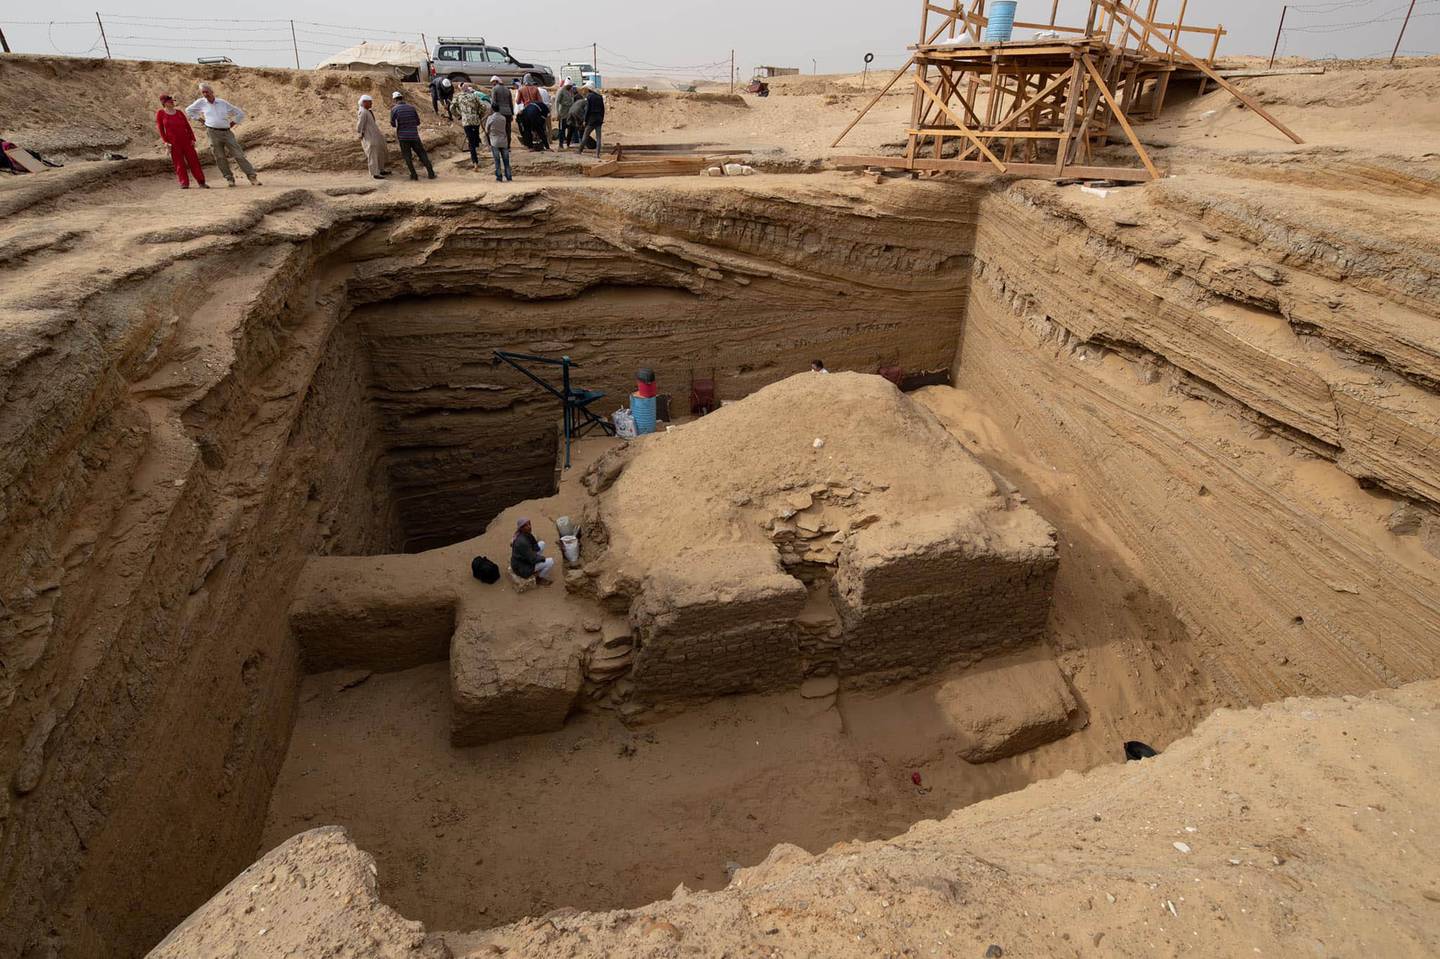 The main well of the tomb of an ancient Egyptian military commander named Wahibre-merry-Neith. The tomb was discovered by a Czech mission working in Giza's Abusir necropolis. Photo: Ministry of Tourism & Antiquities